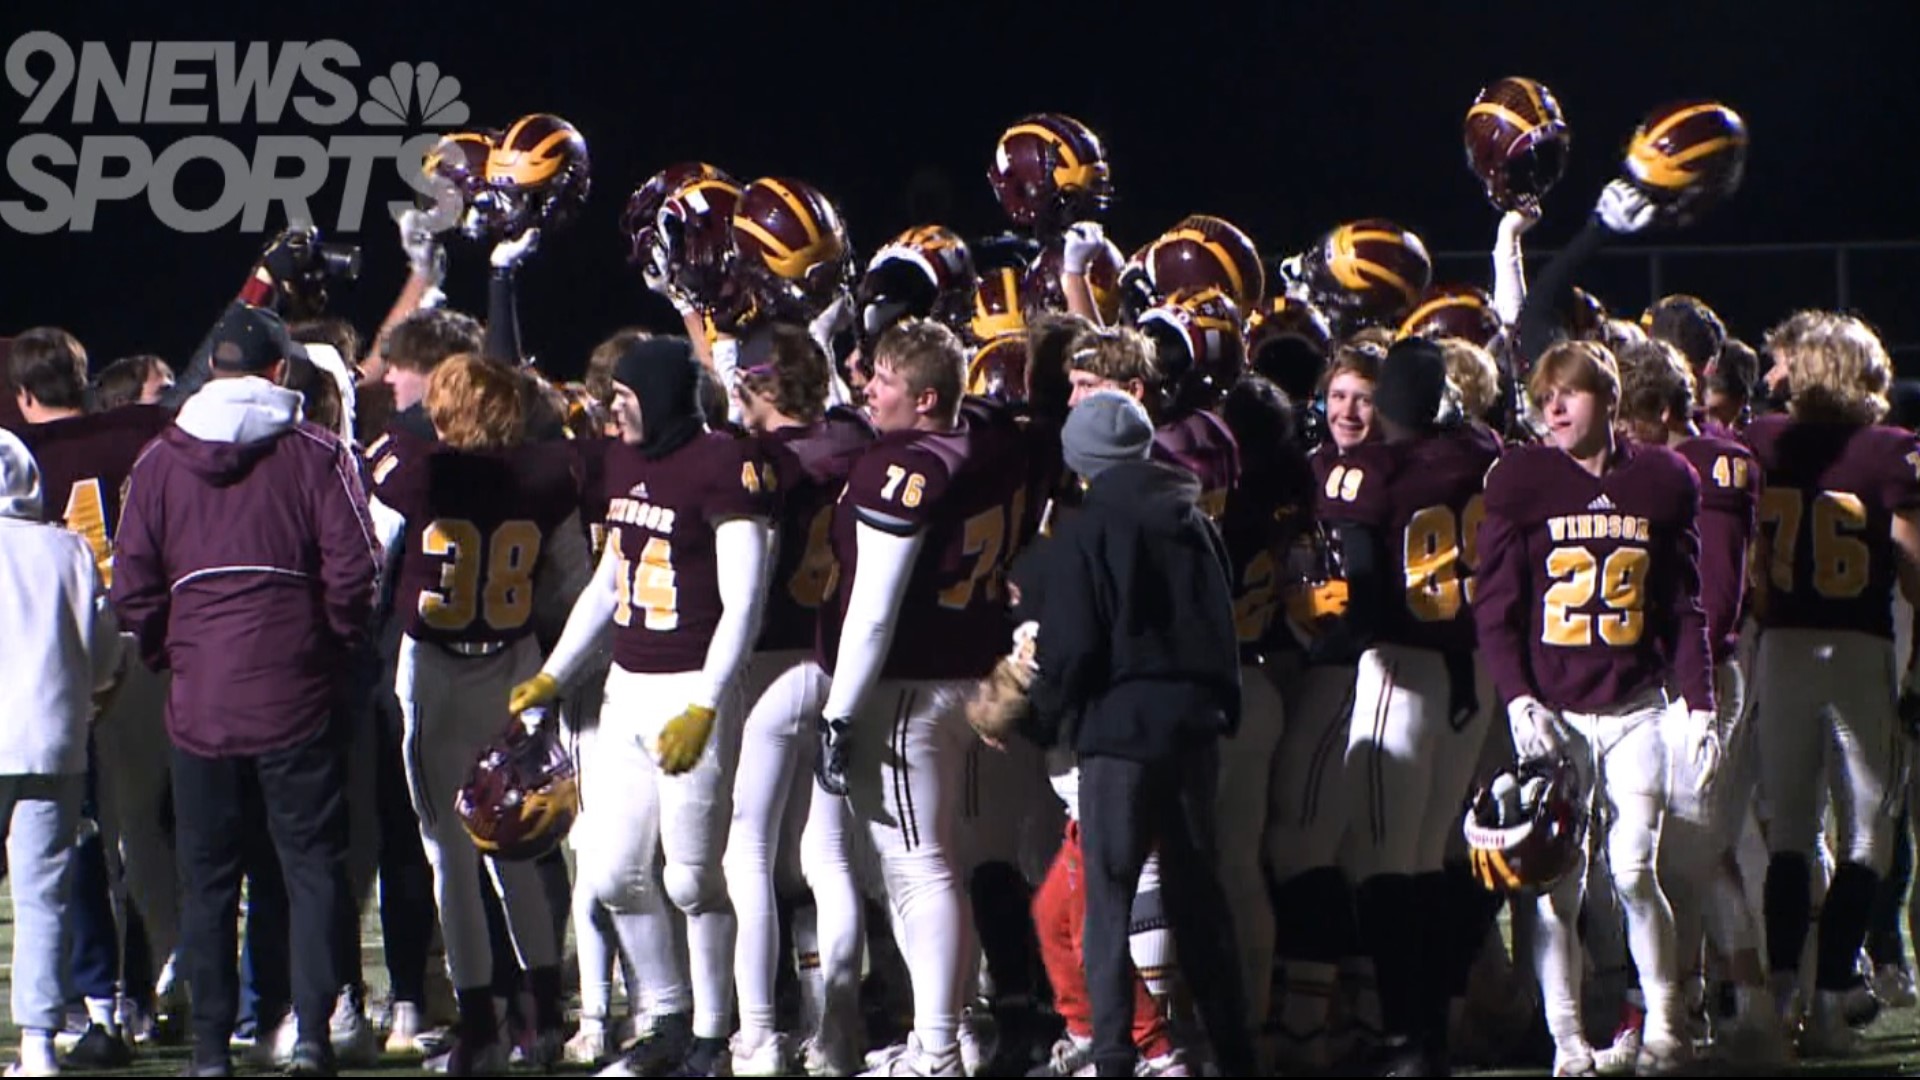 The Wizards defeated the Bears 23-6 on Friday night to advance in the Class 4A football playoffs.